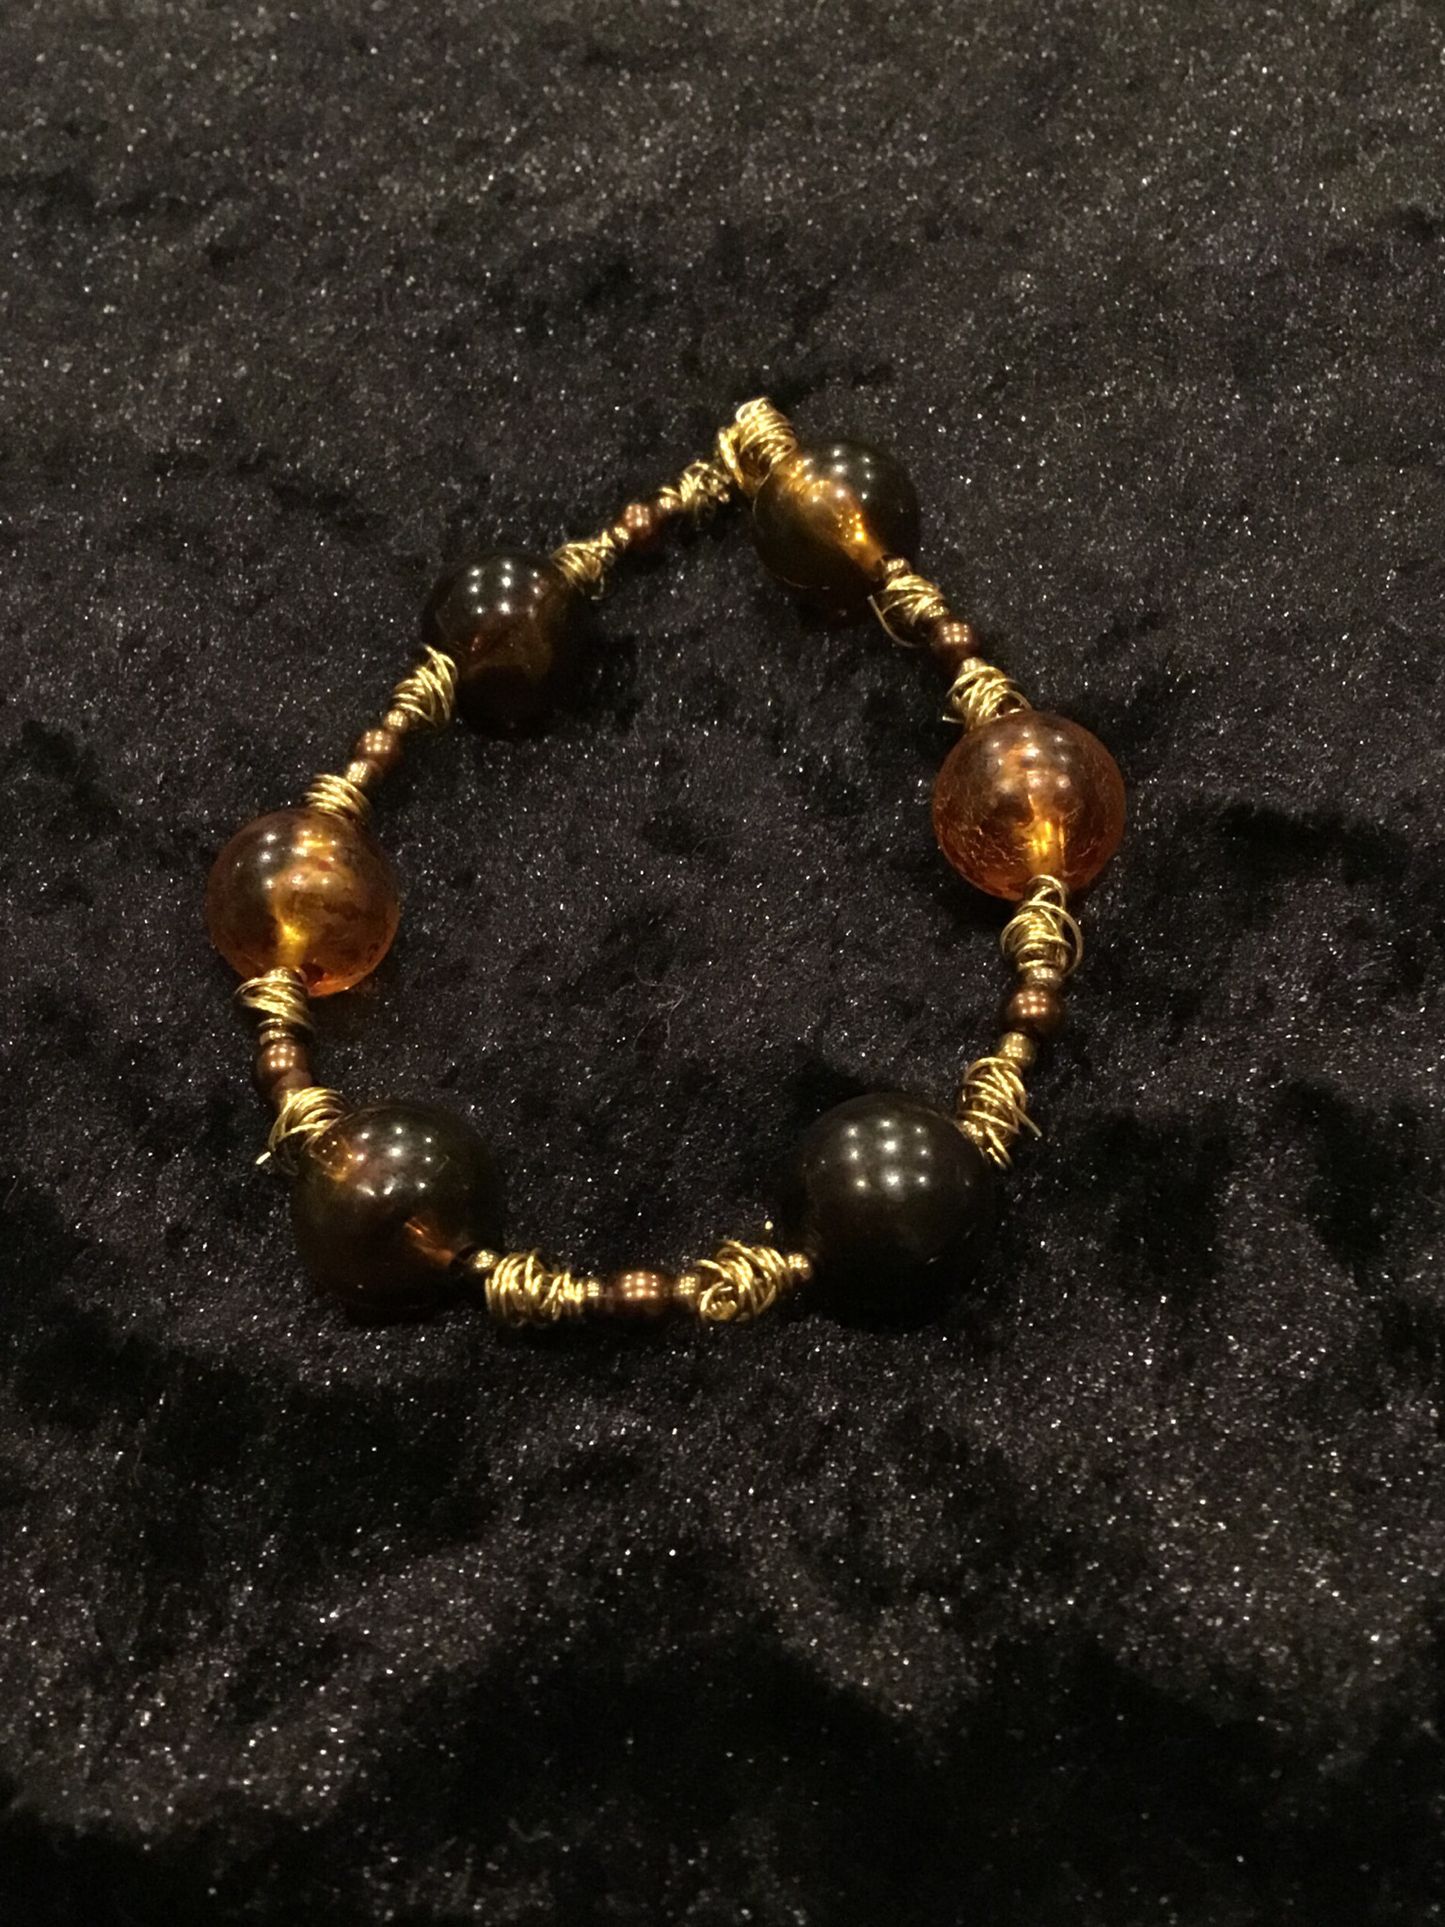 Wire & brown bead bracelet with gold wire